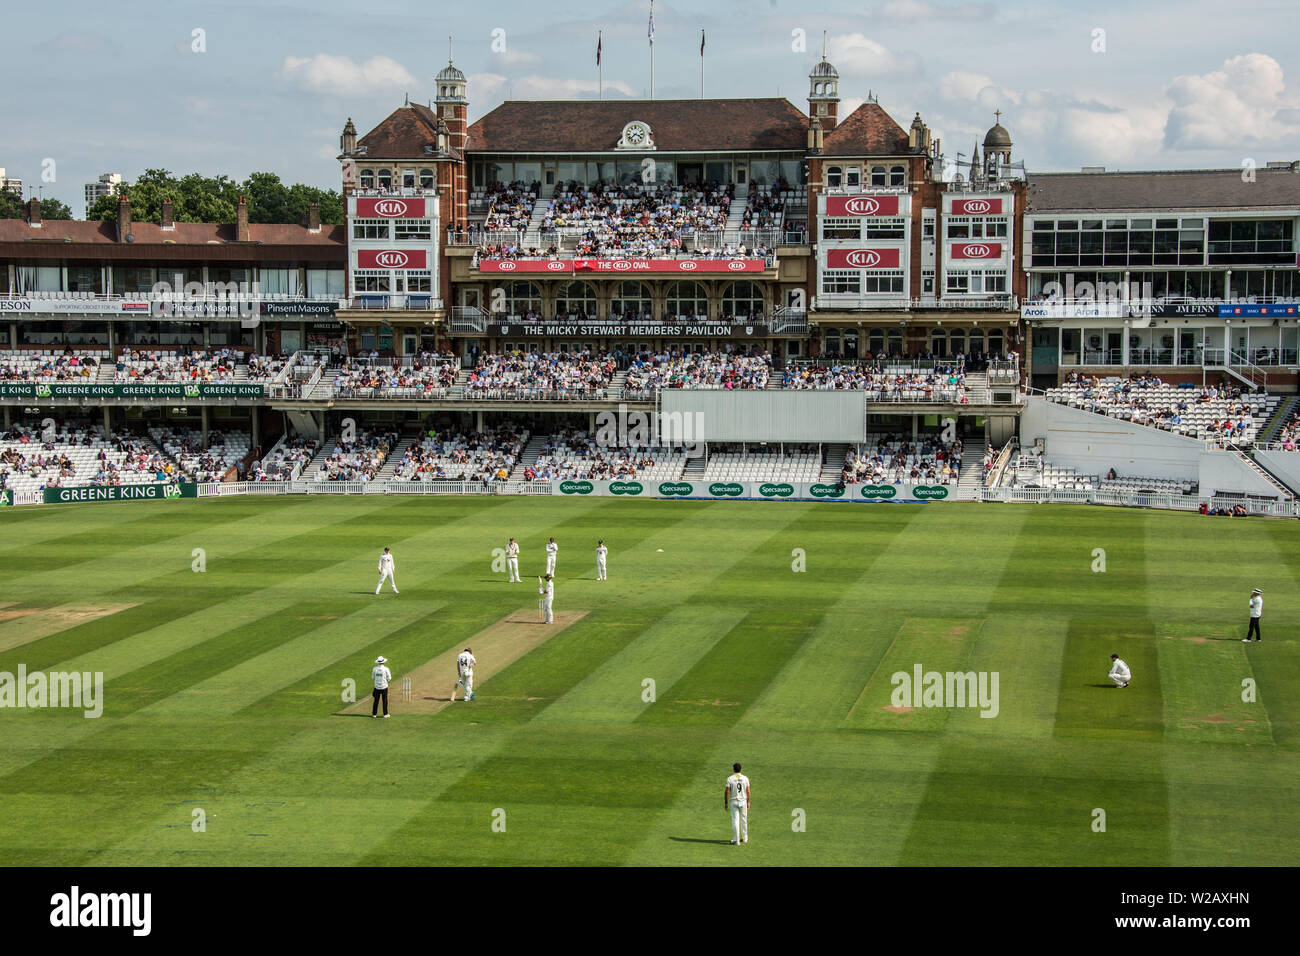 London, UK. 7 July, 2019.  Kent in the field  with the Micky Stewart Members' Pavilion in the background on the first day of the Specsavers County Championship game between Surrey and Kent at the Kia Oval. David Rowe/Alamy Live News Stock Photo